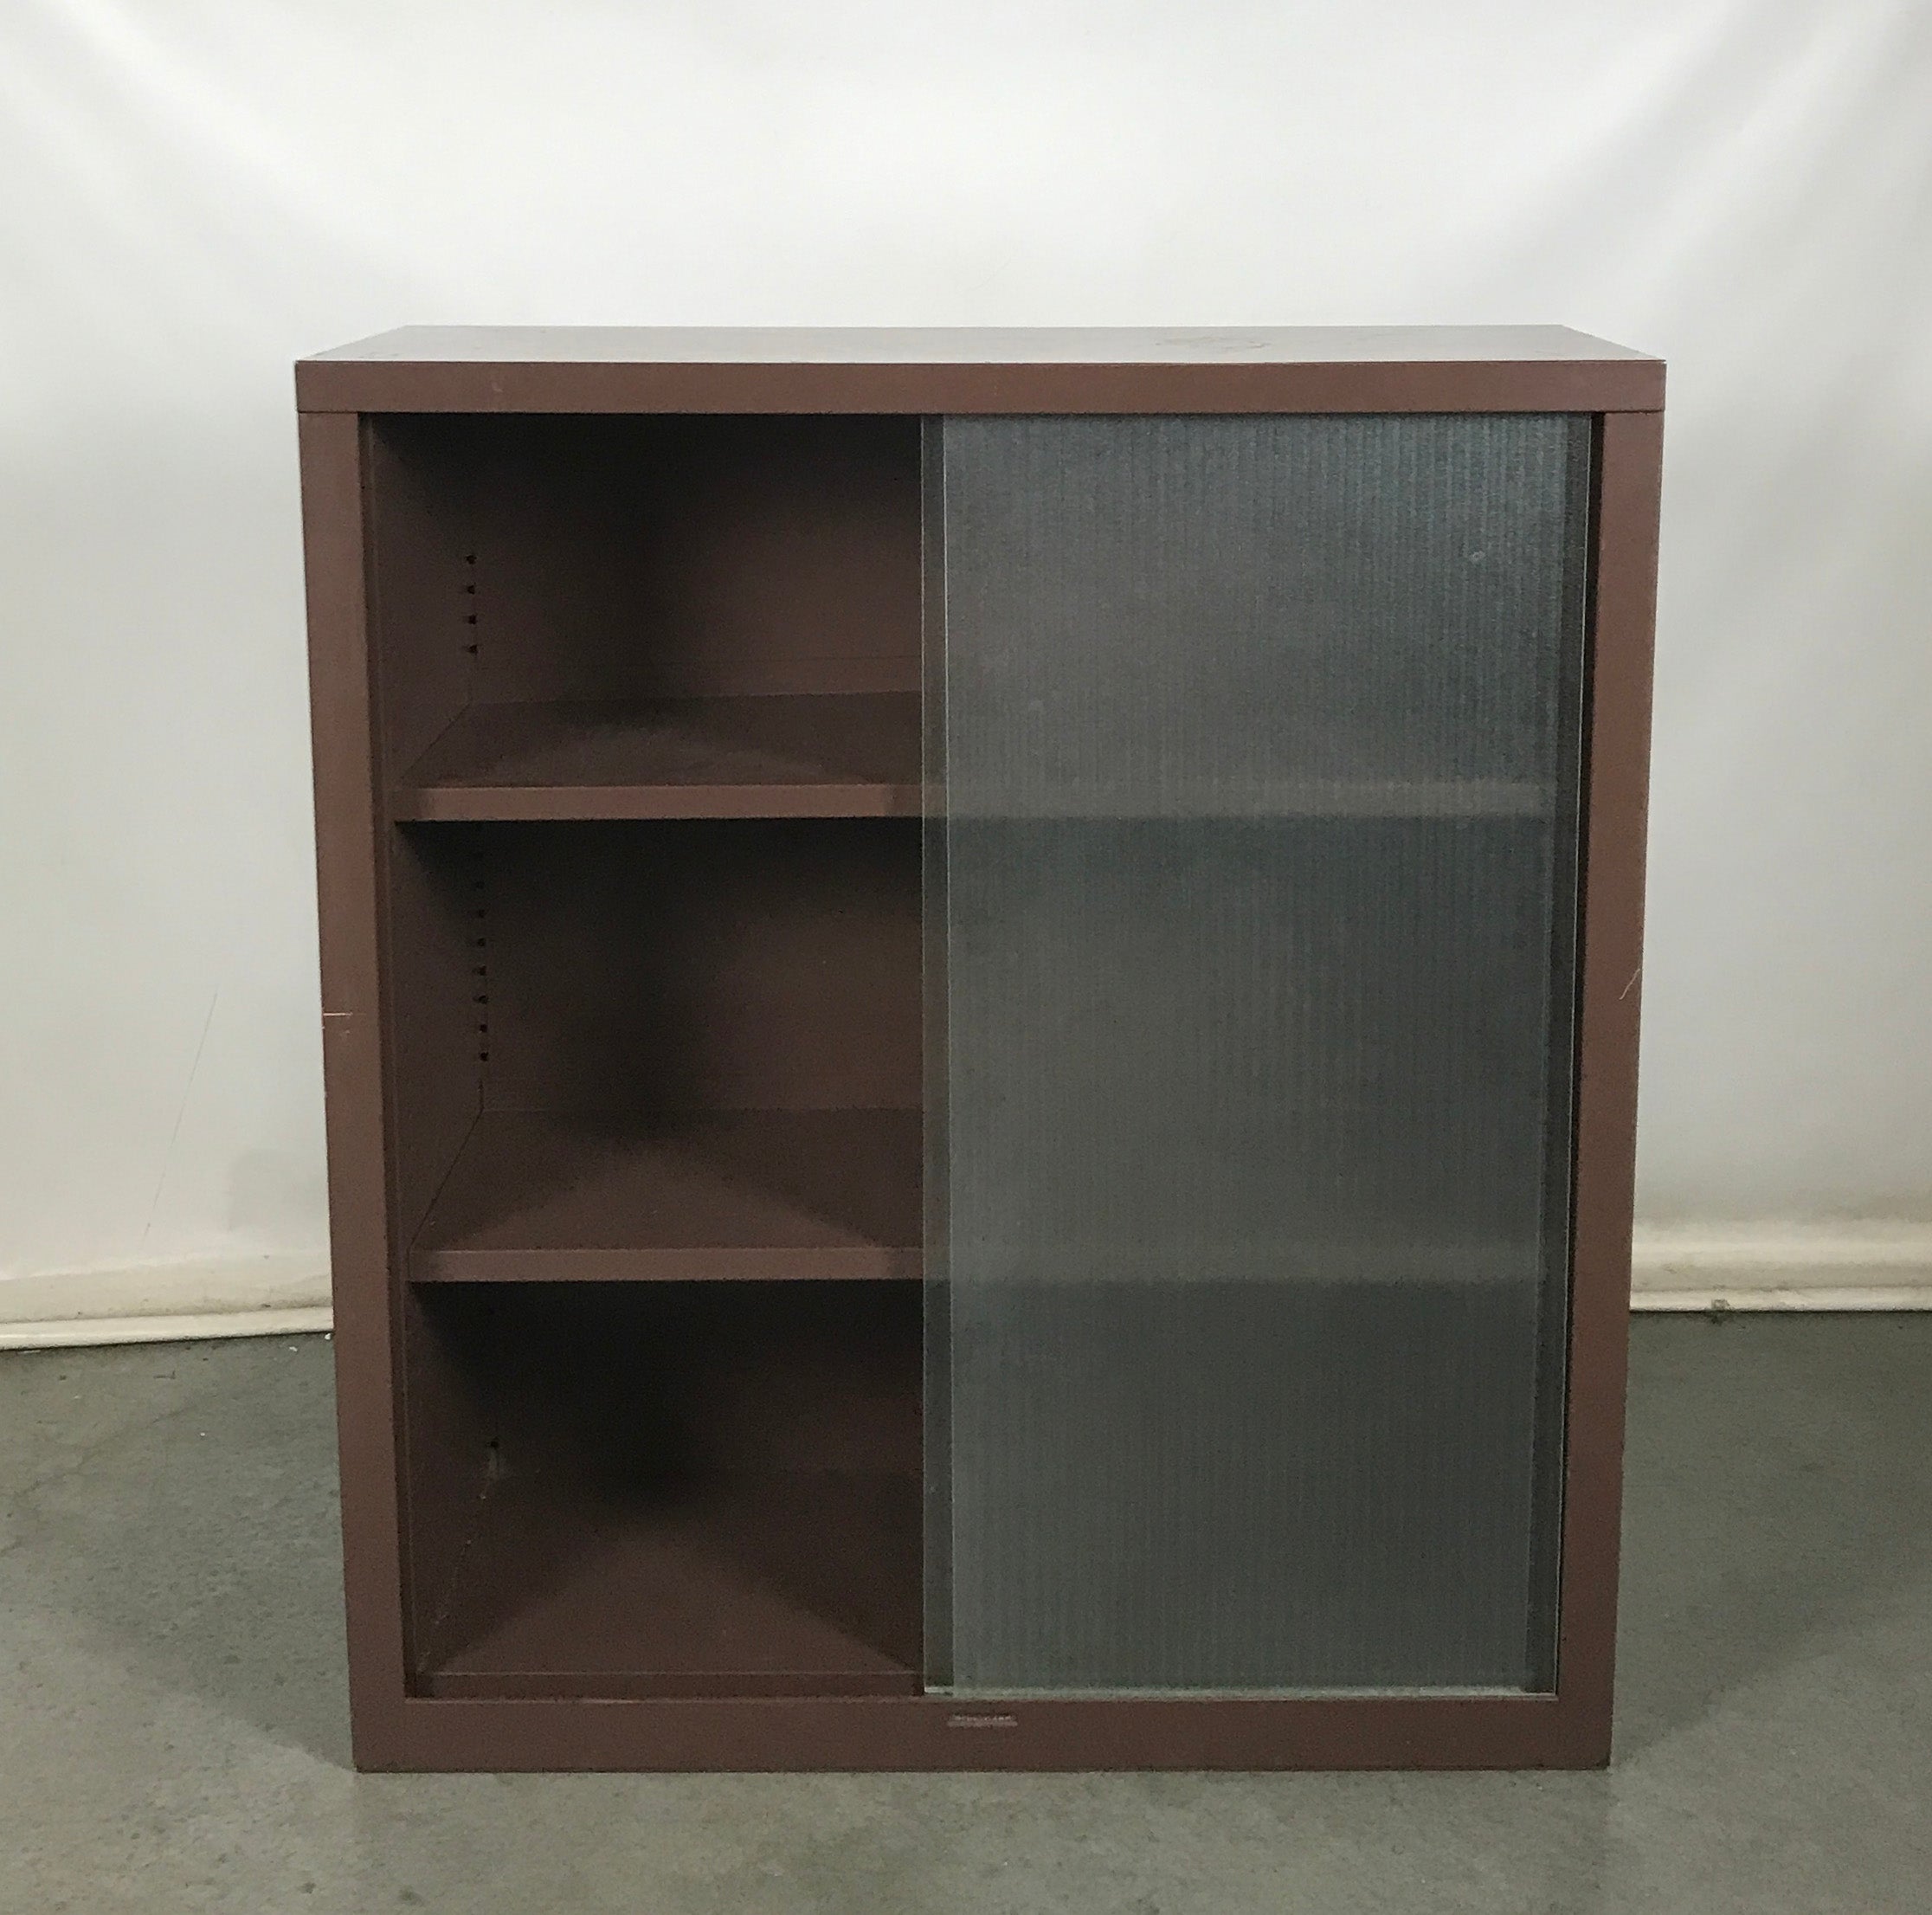 Brown Metal Cabinet With Sliding Glass Doors